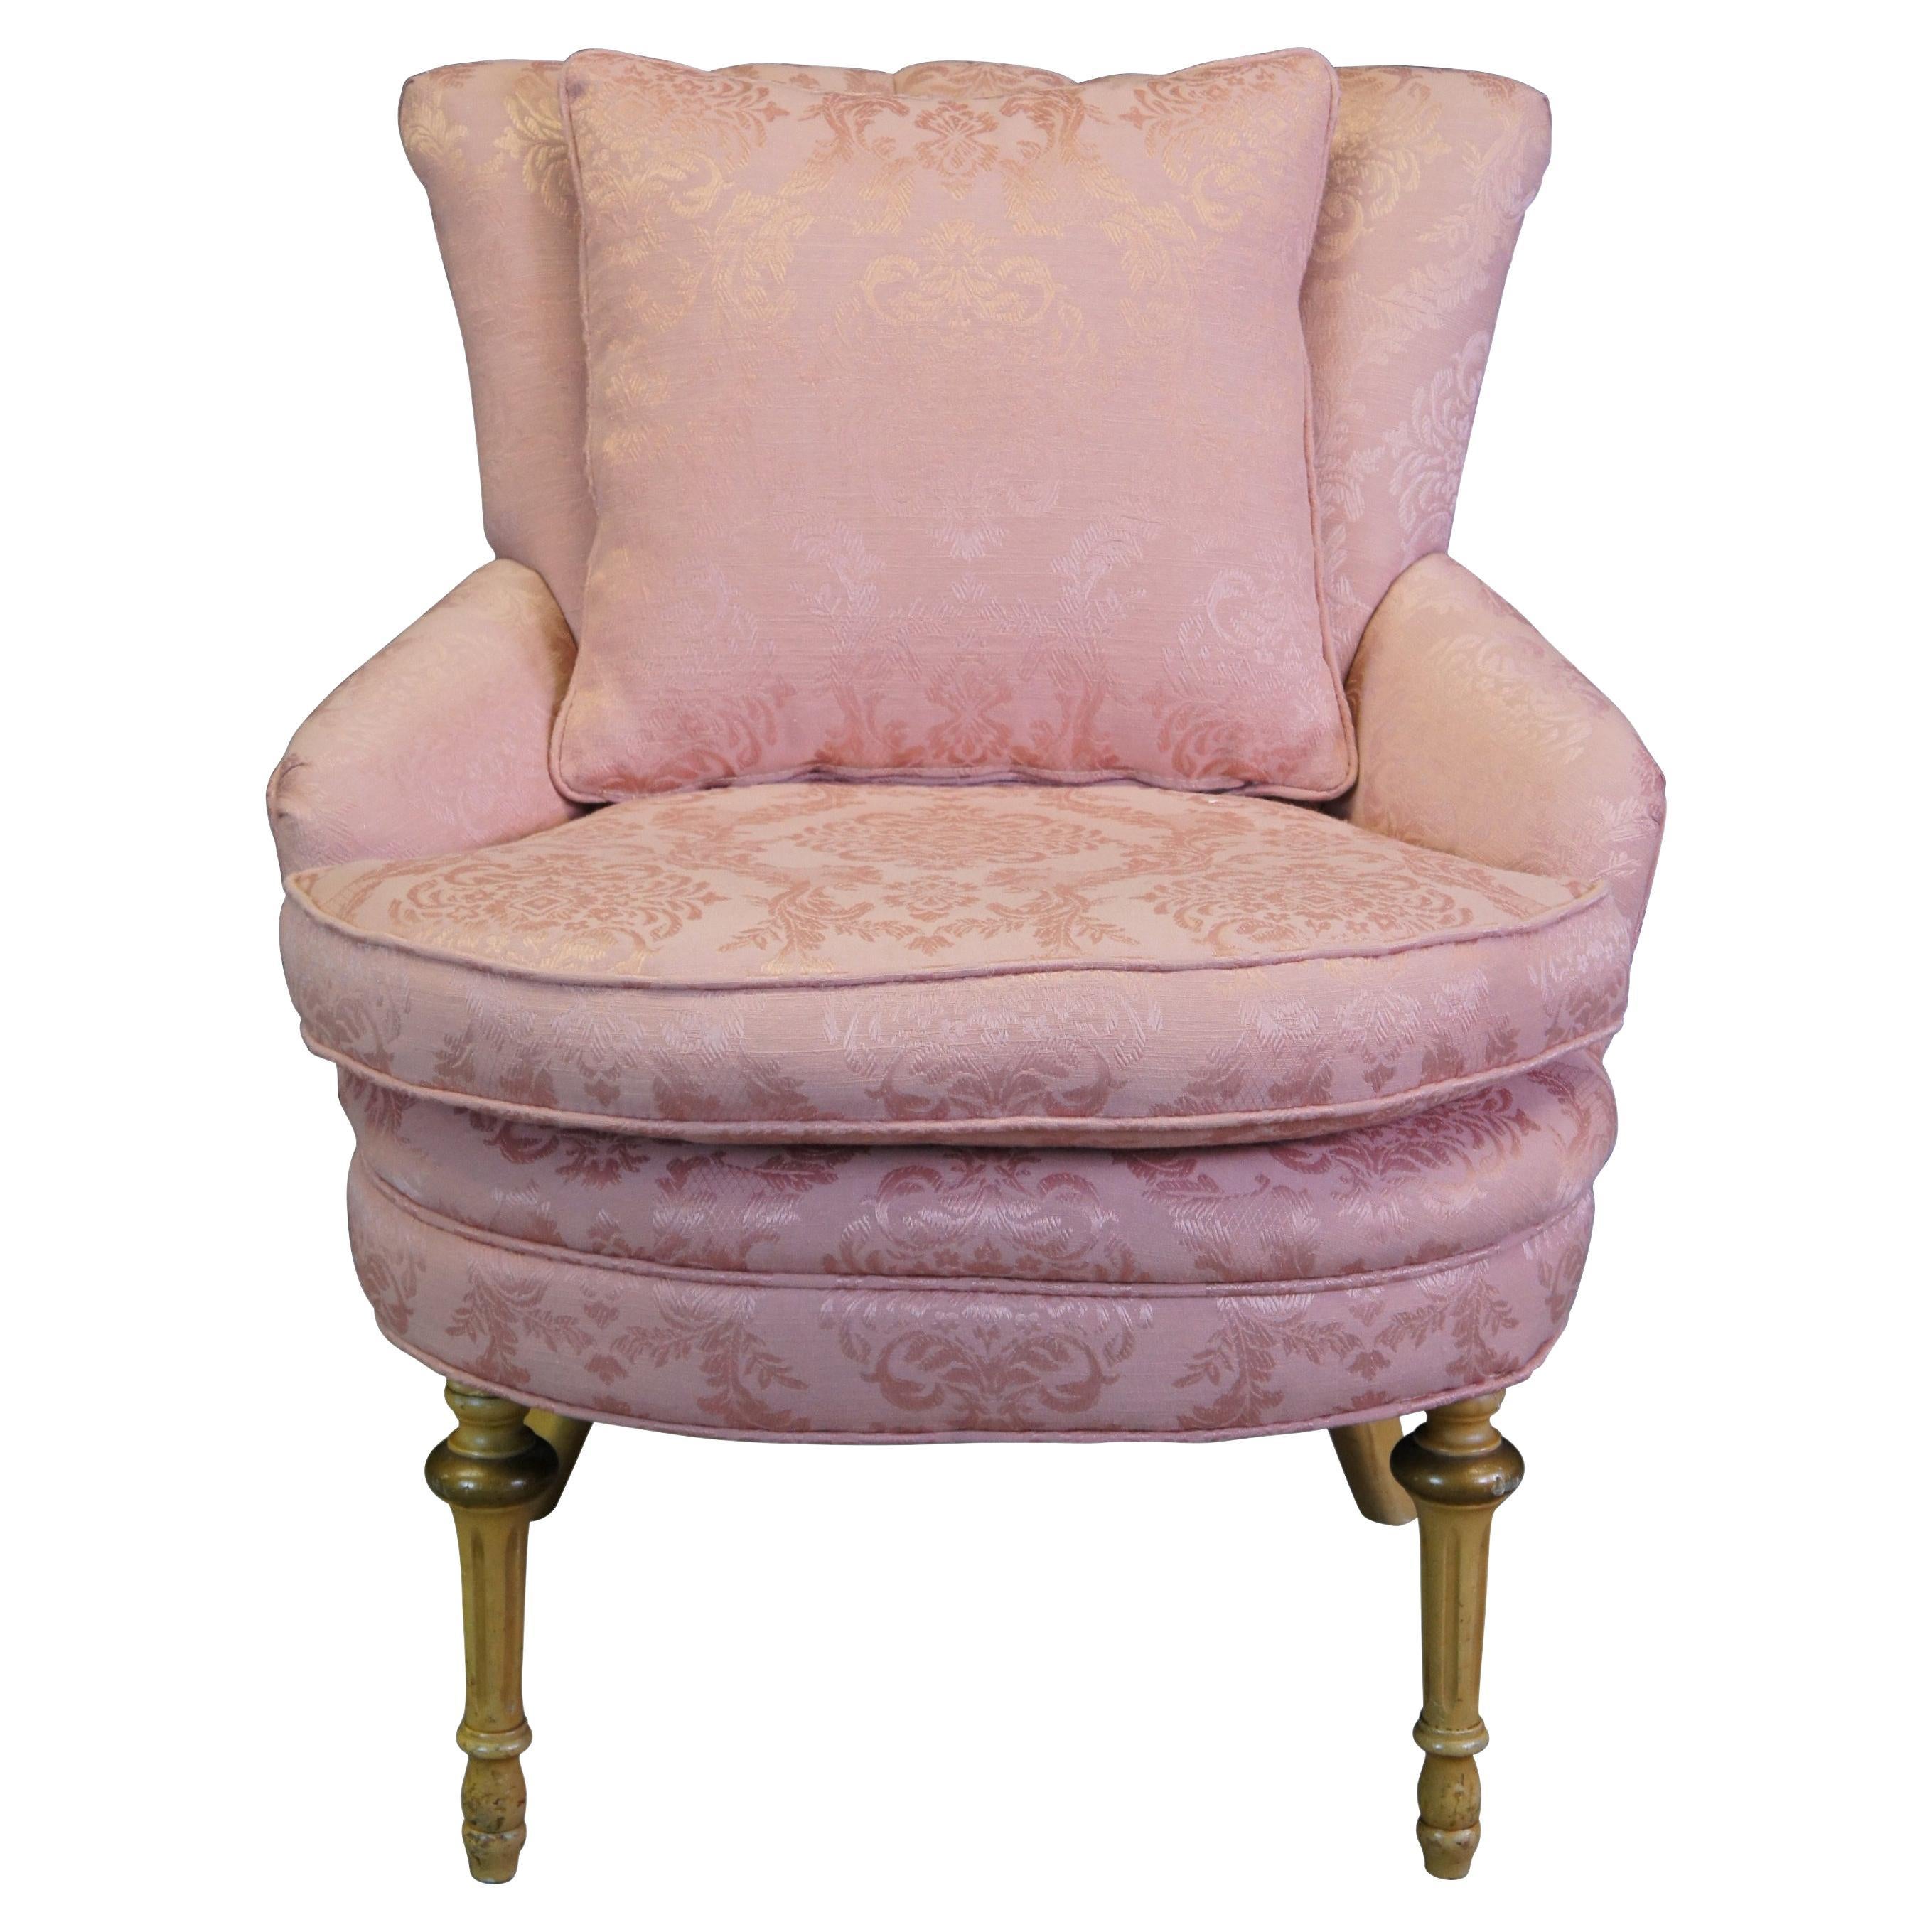 Antique Robert W Irwin French Provincial Channel Back Vanity Chair Pink Brocade